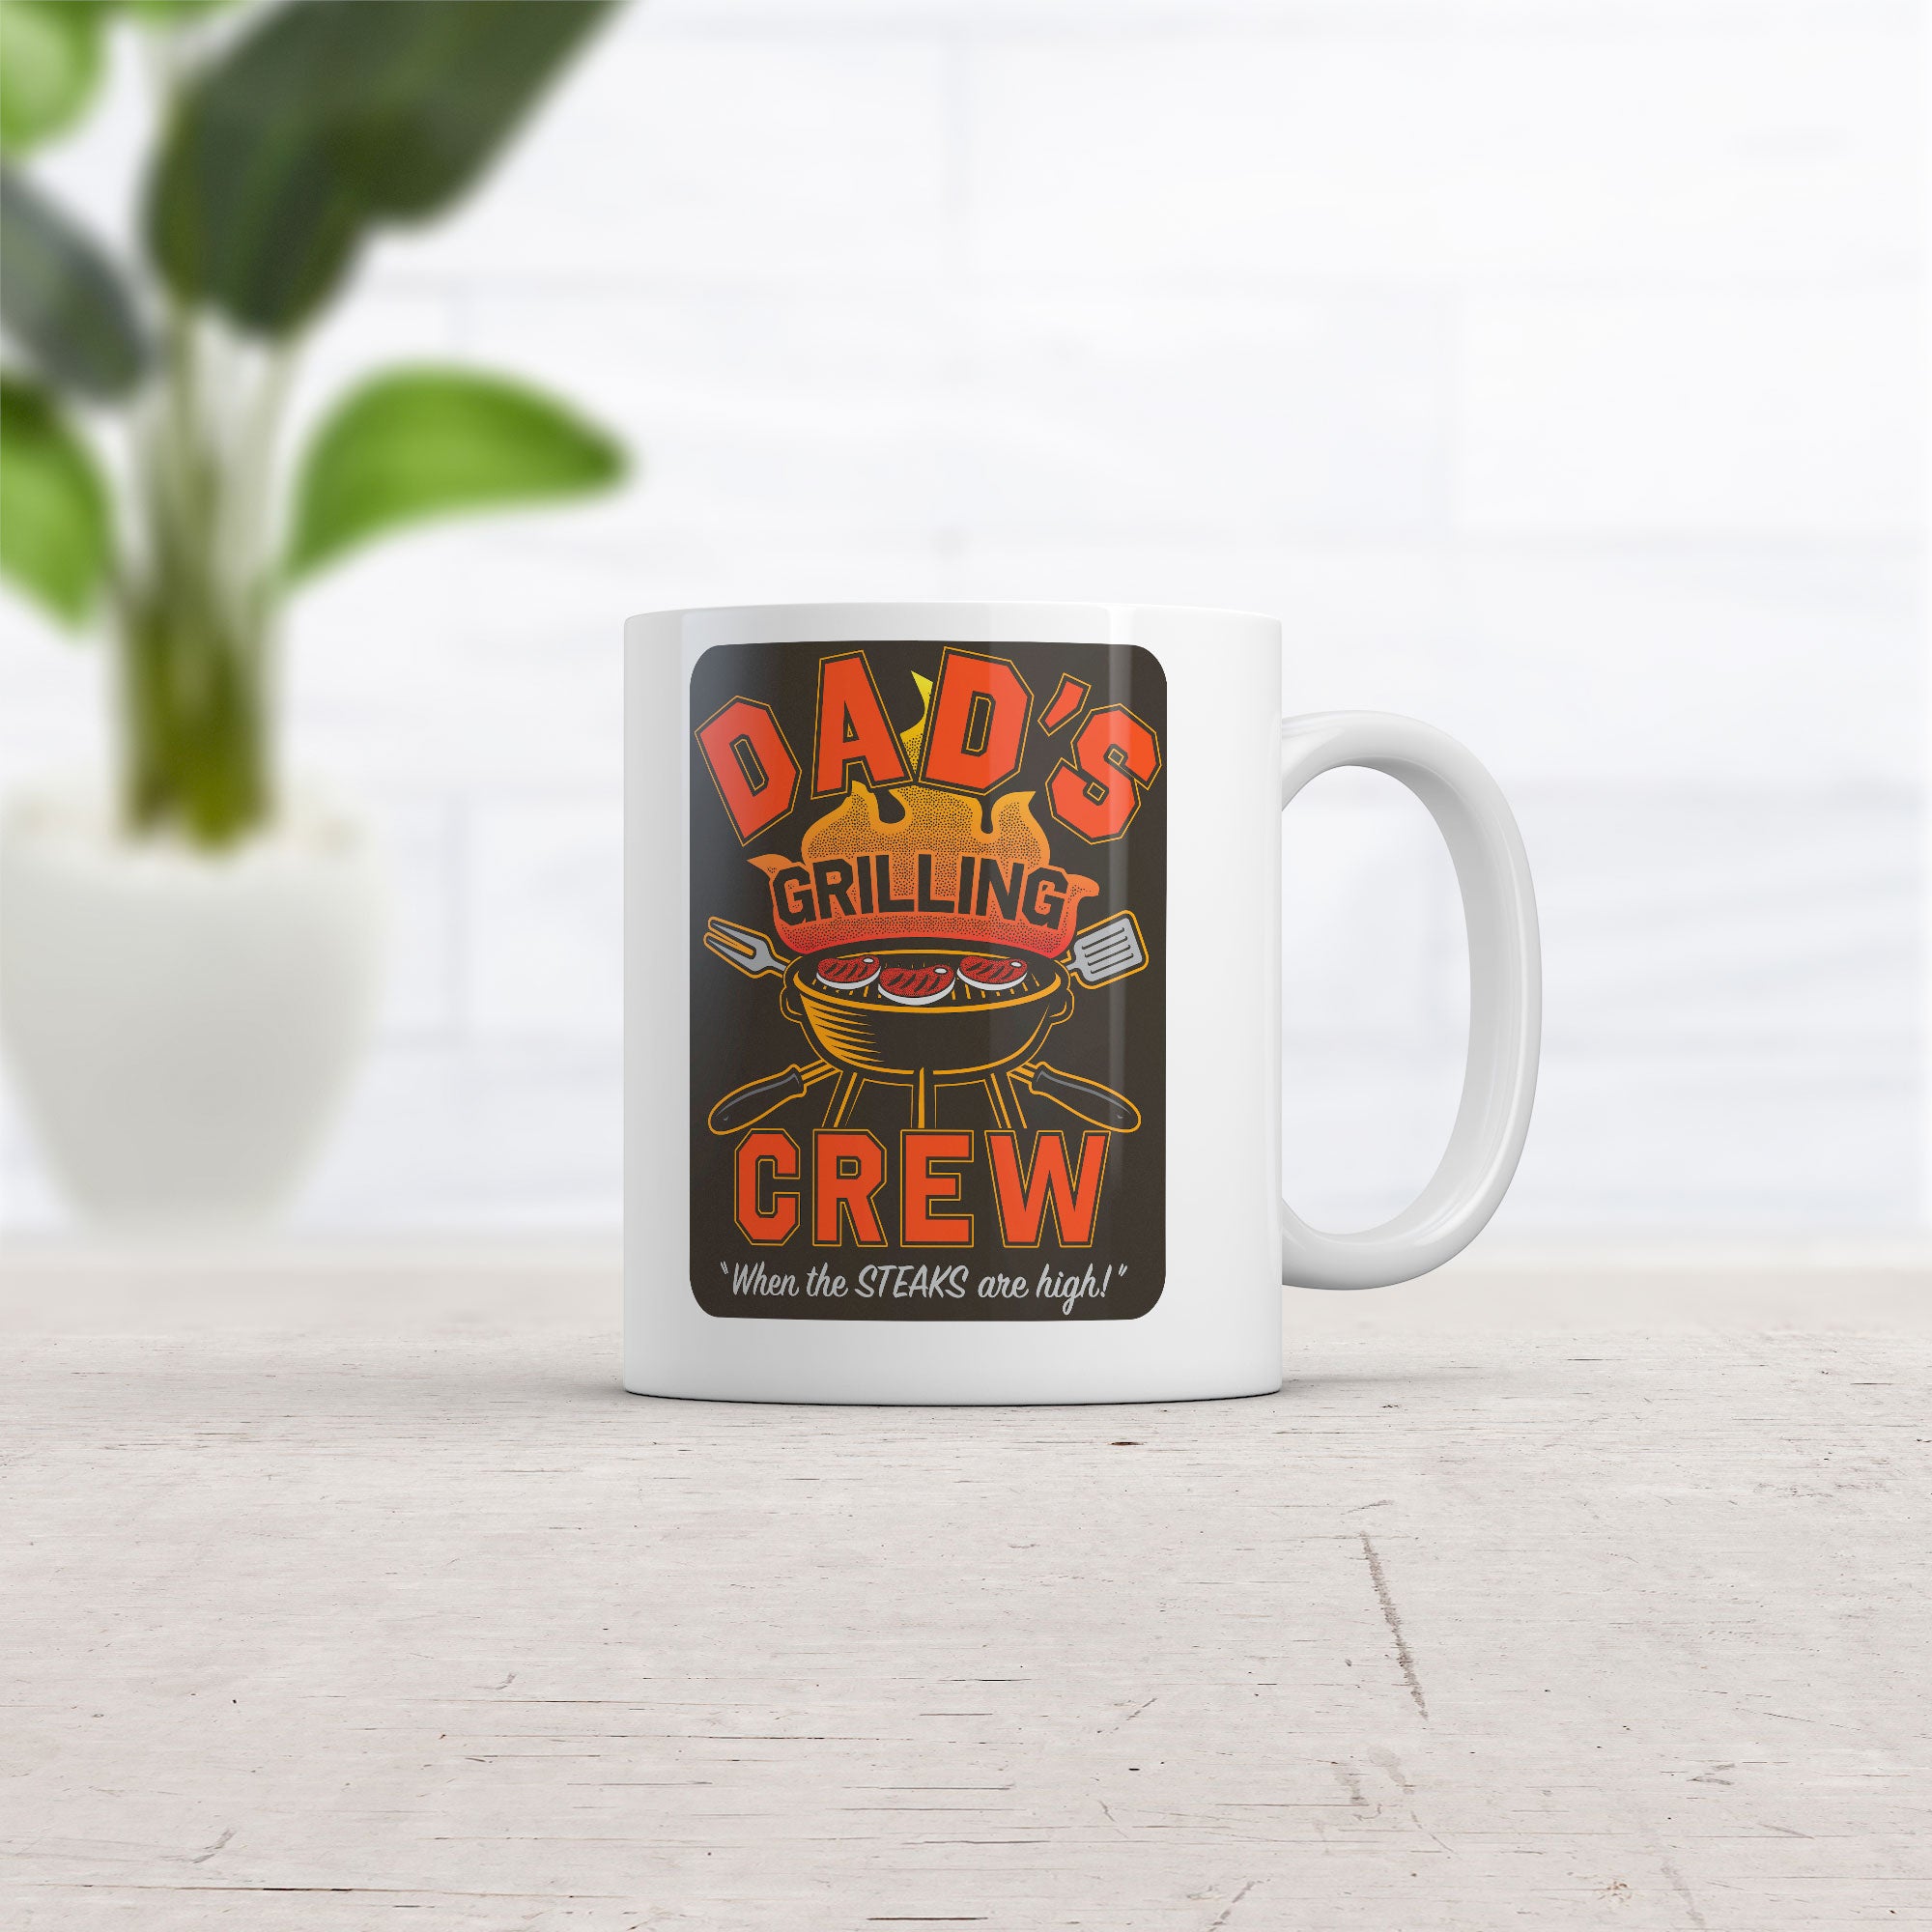 Funny White Dads Grilling Crew Coffee Mug Nerdy Father's Day Food Tee